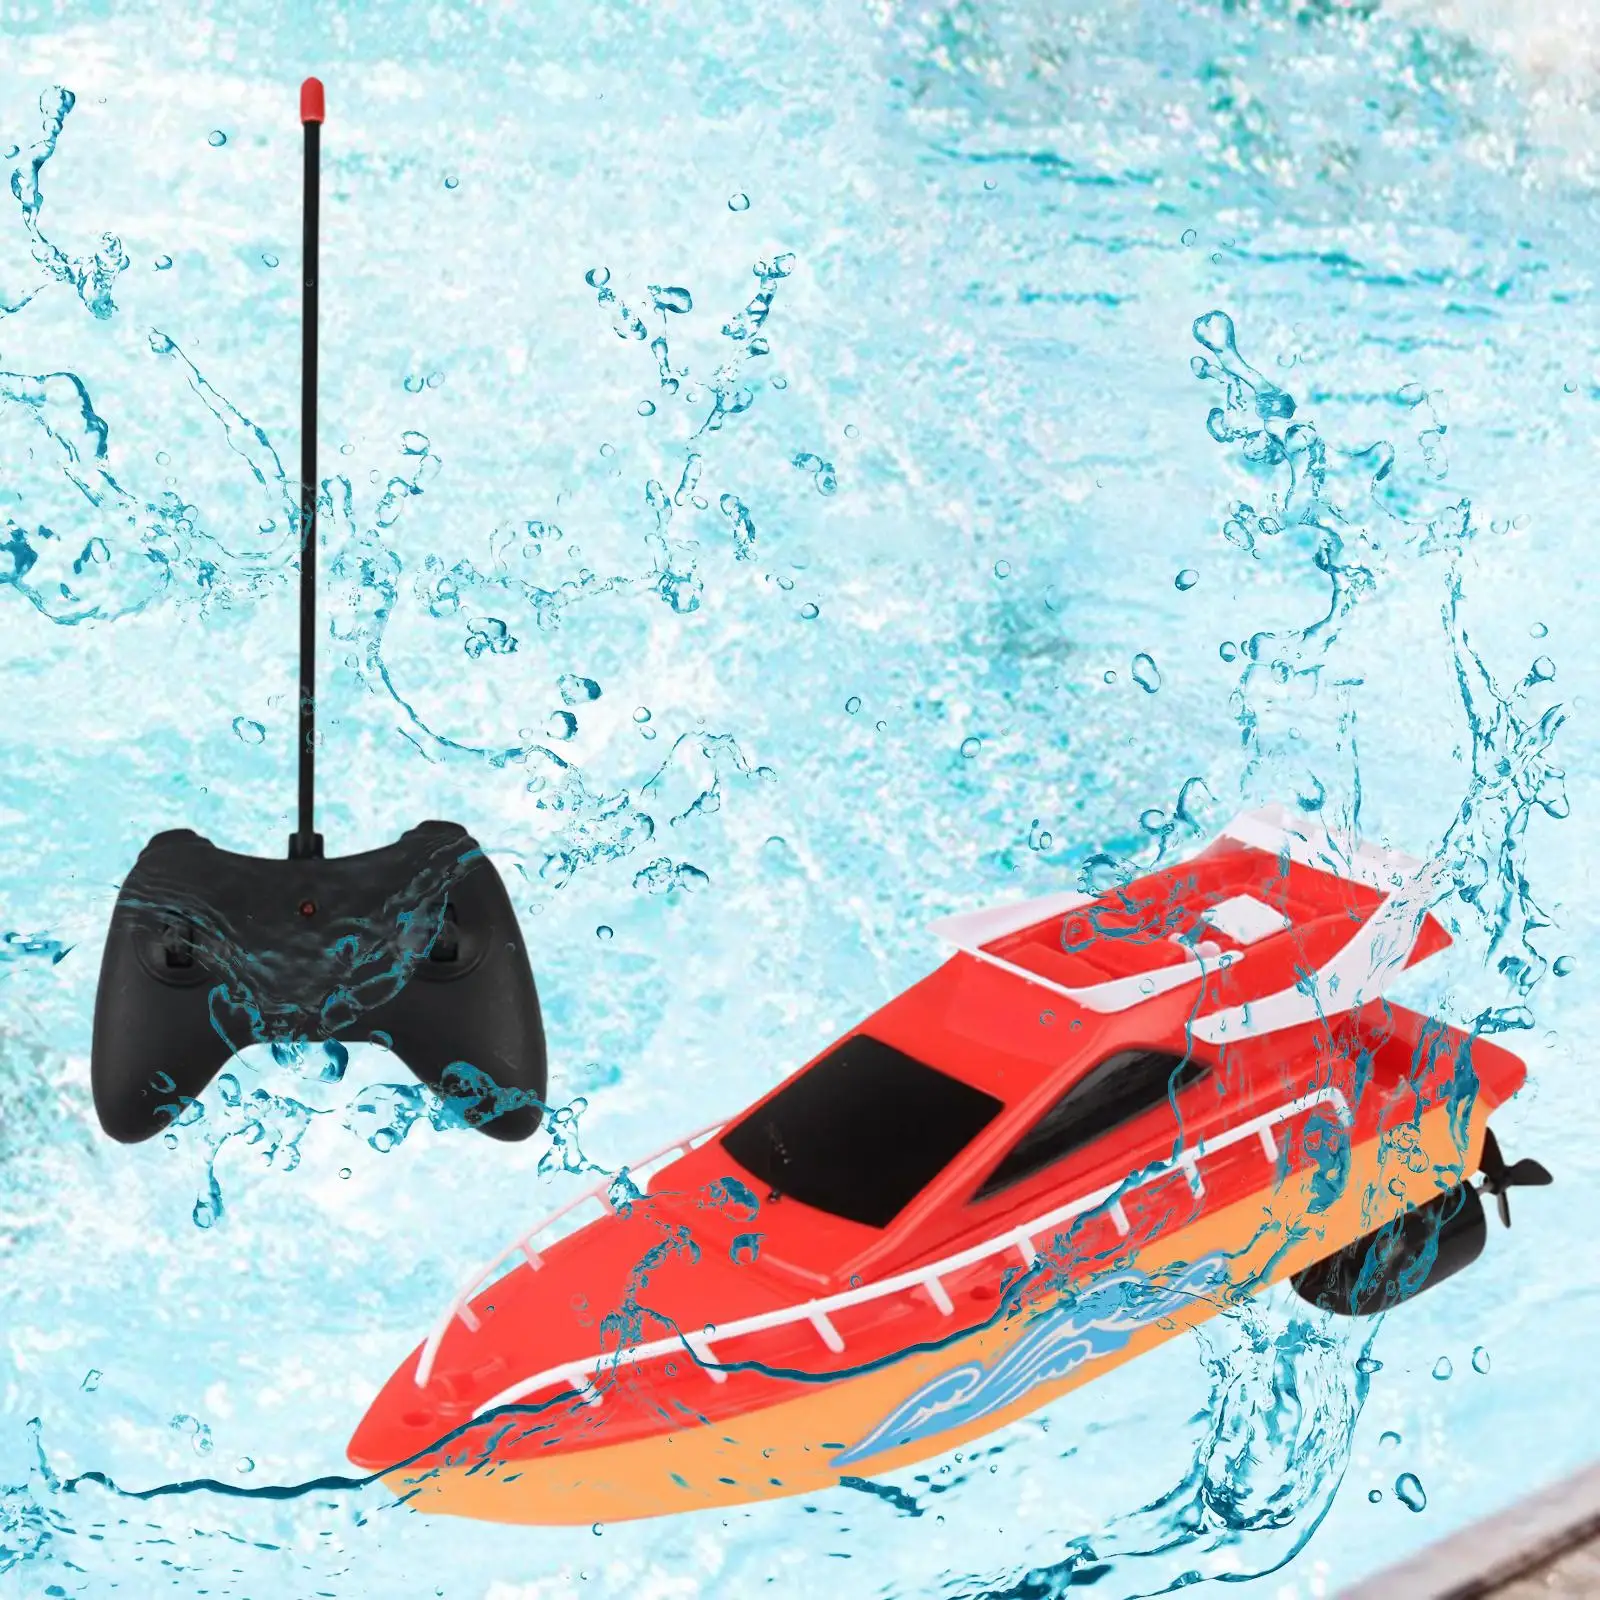 High Speed Remote Control Speedboat Pools Lakes Outdoor Toys for Boys Toy Electronic Wireless RC Boat Children Gifts